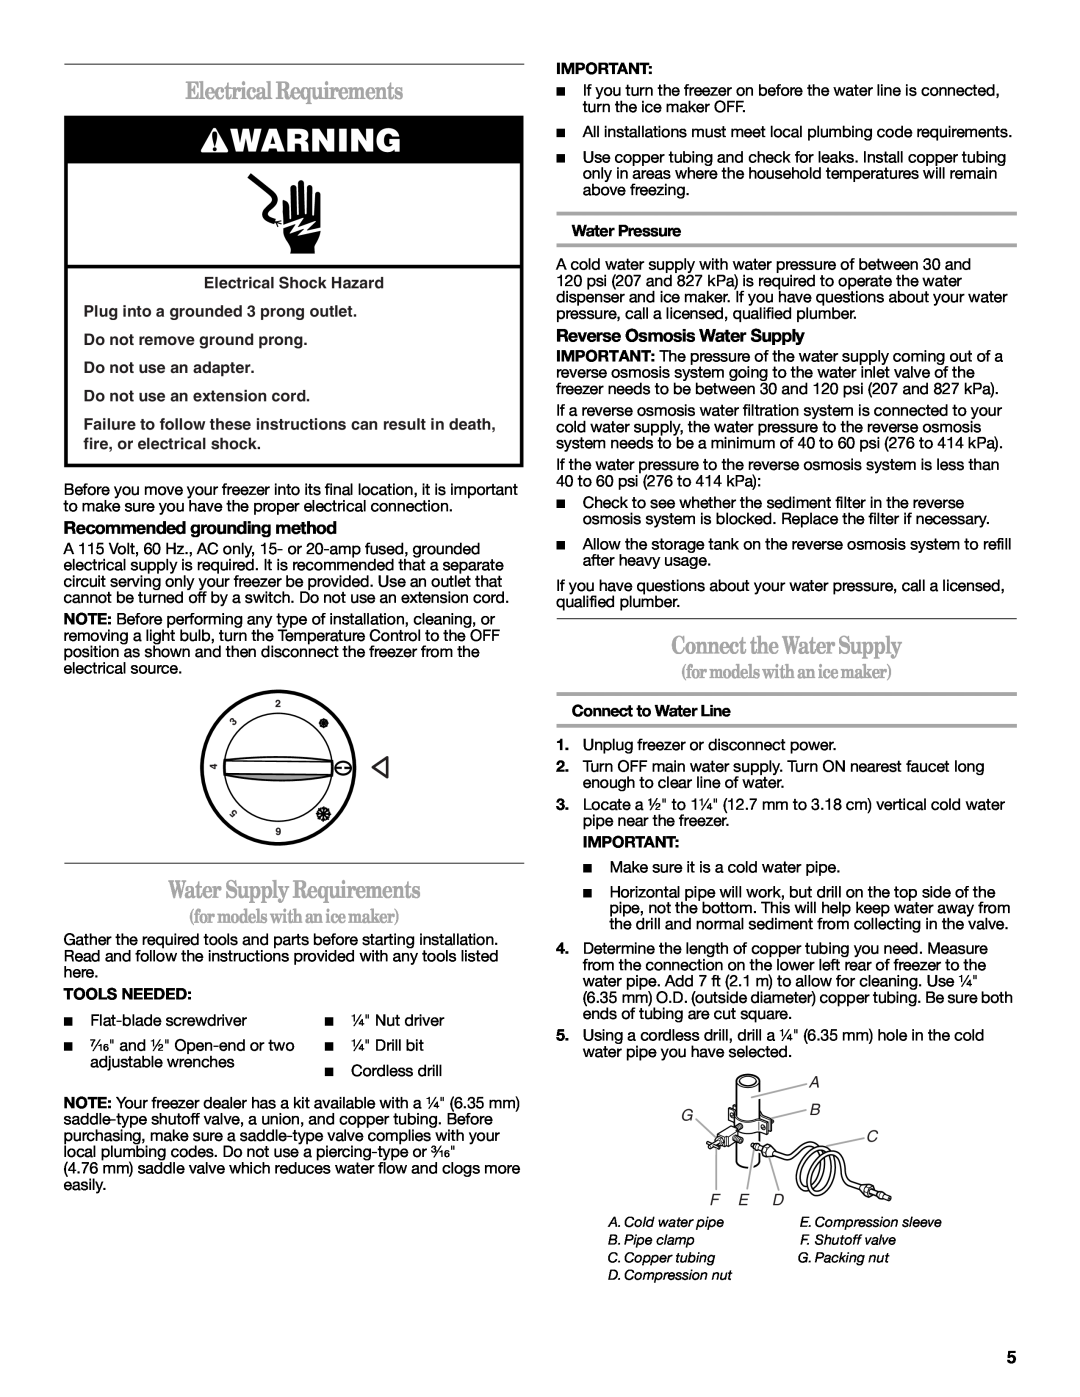 Whirlpool W10326801A manual Electrical Requirements, Water Supply Requirements, Connect the Water Supply, Tools Needed 